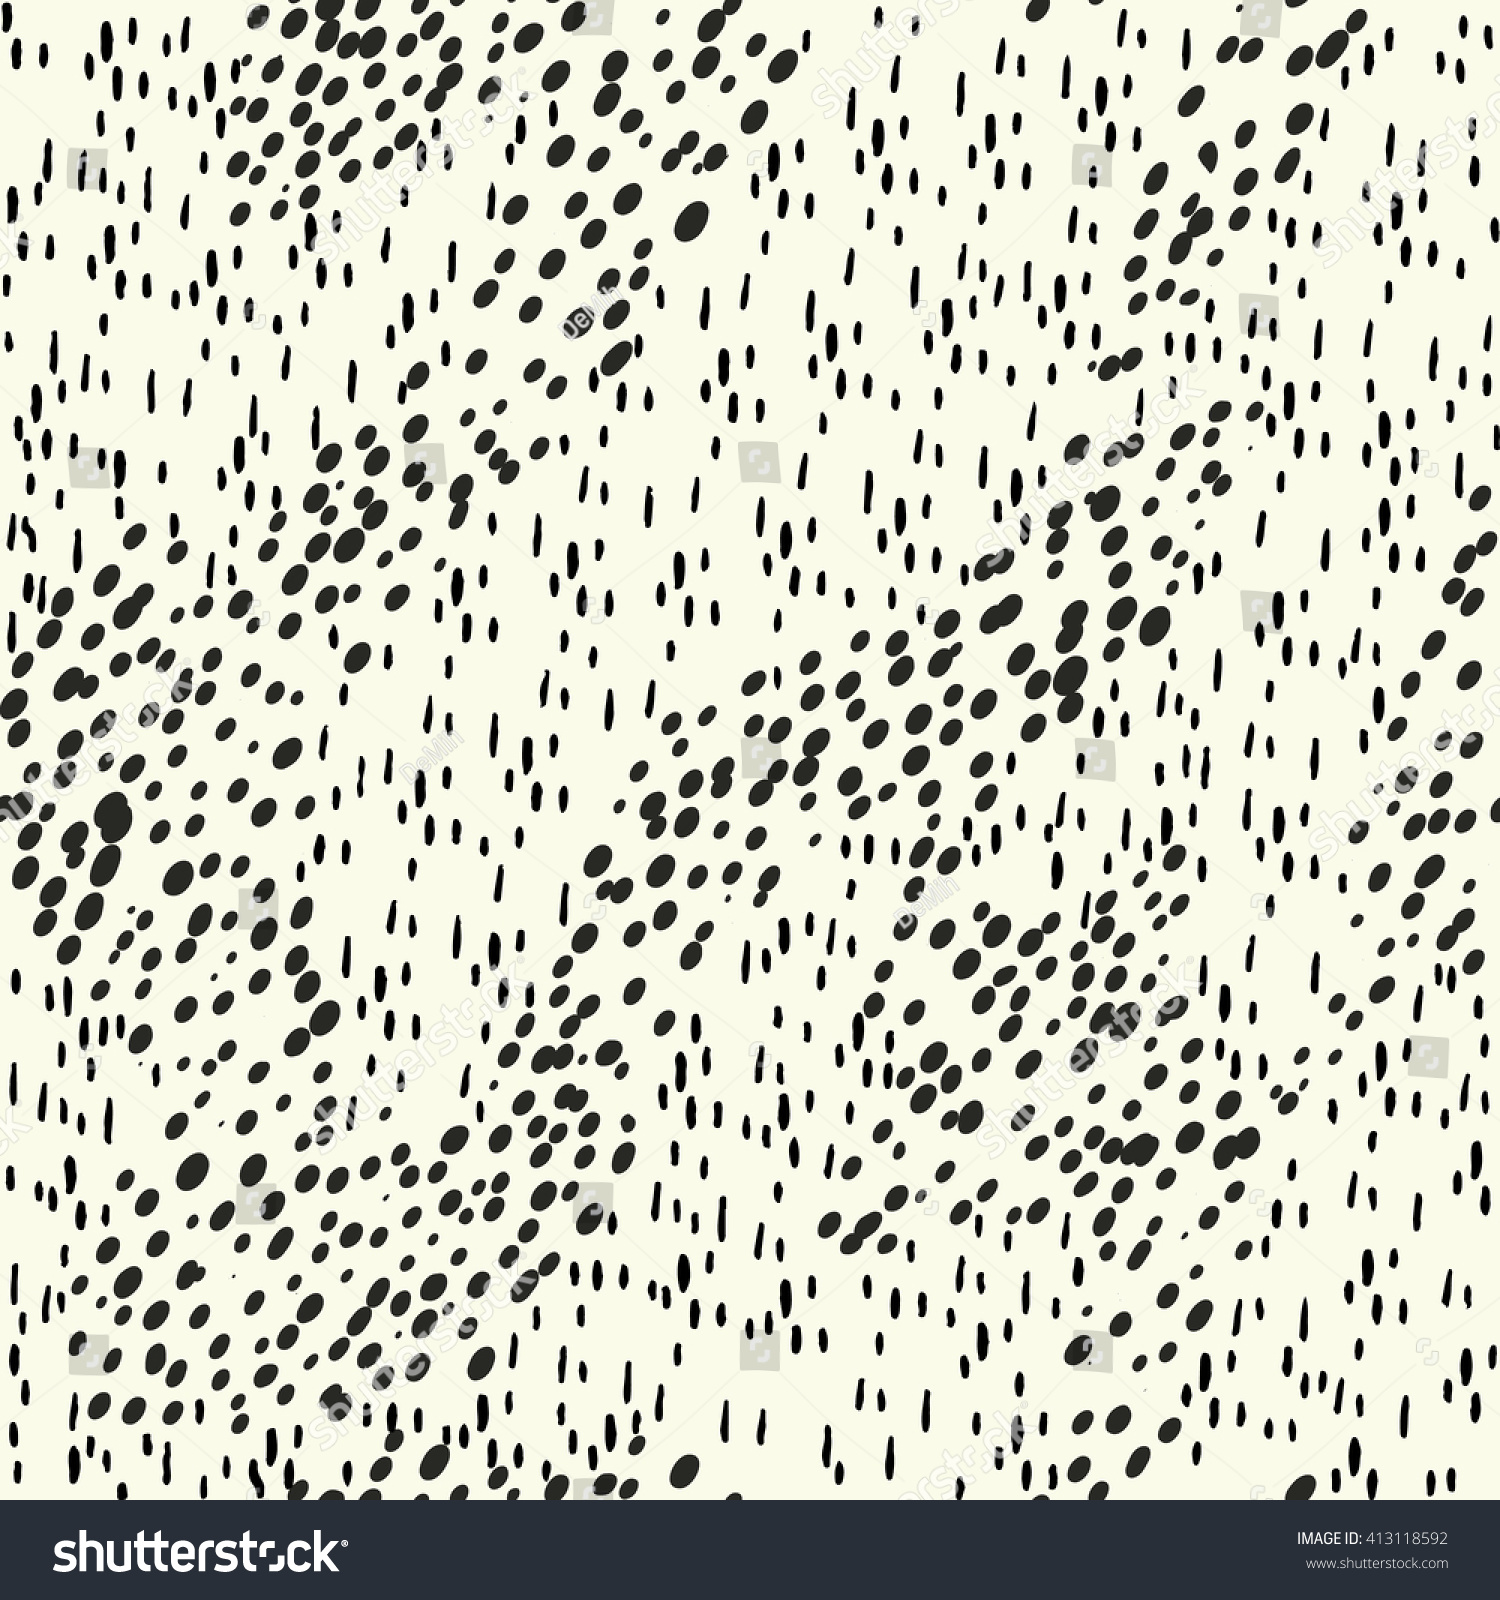 SVG of Abstract pattern, seamless. Spots on white background svg